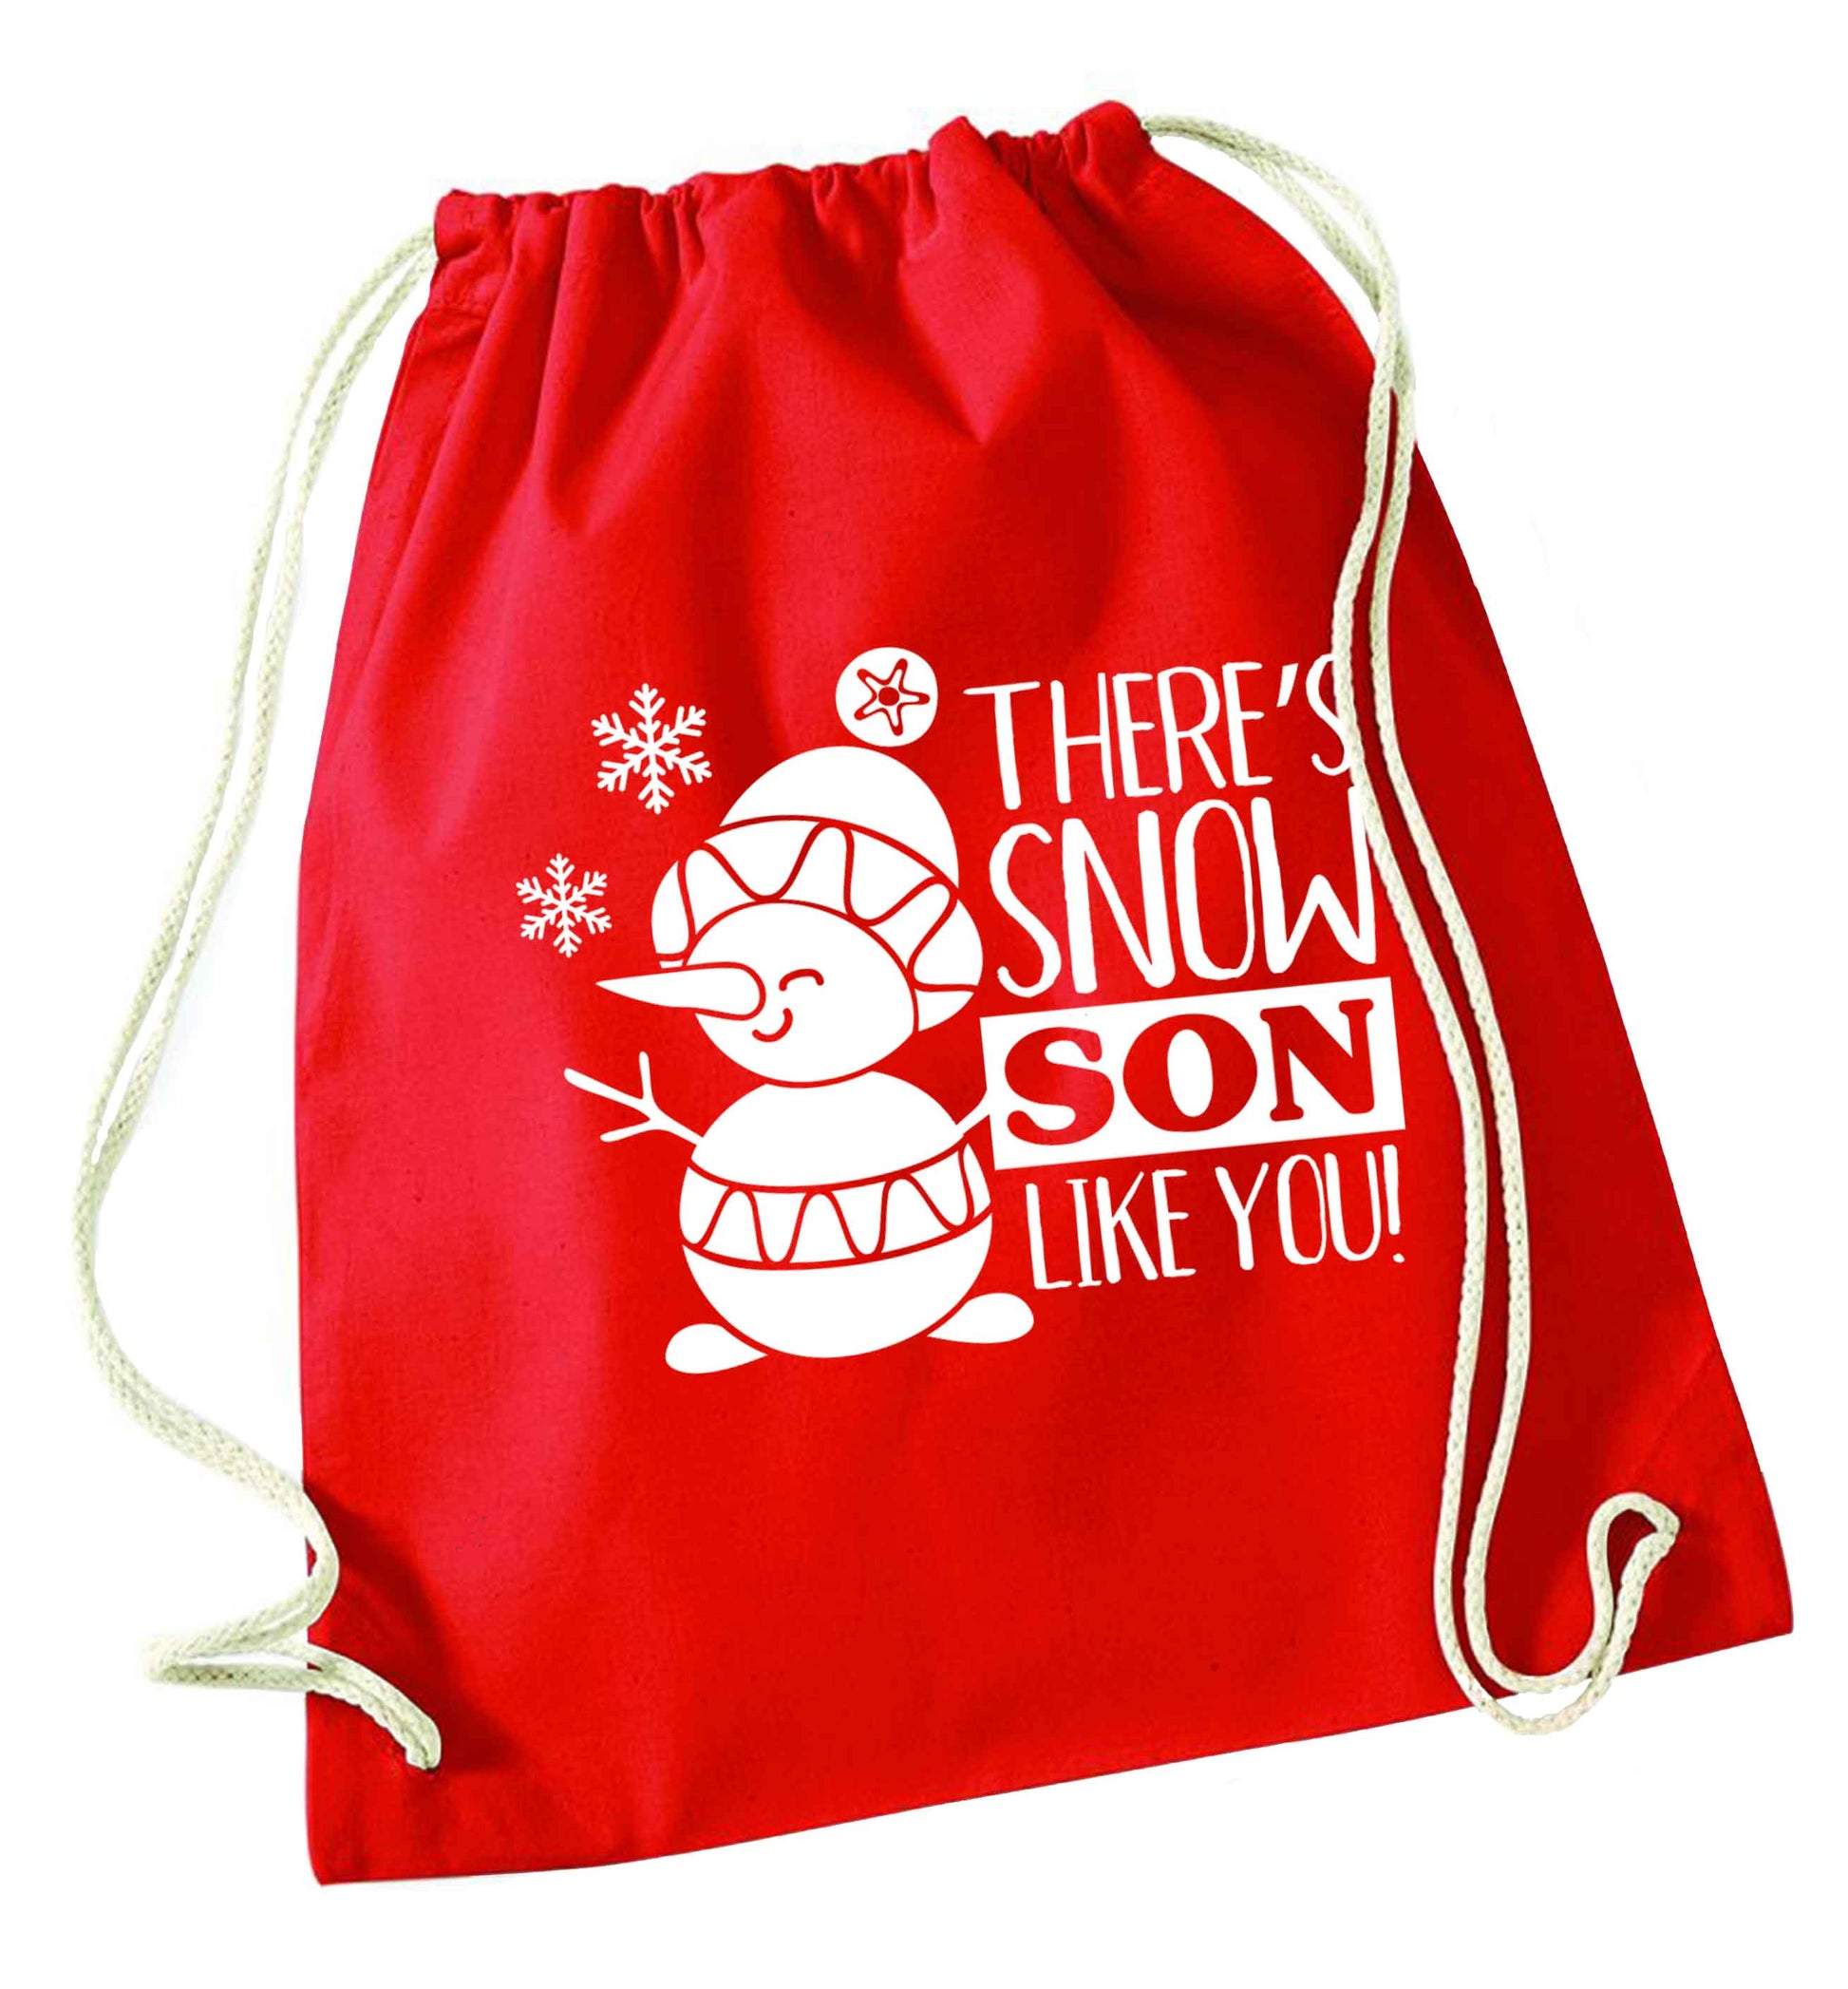 There's snow son like you red drawstring bag 